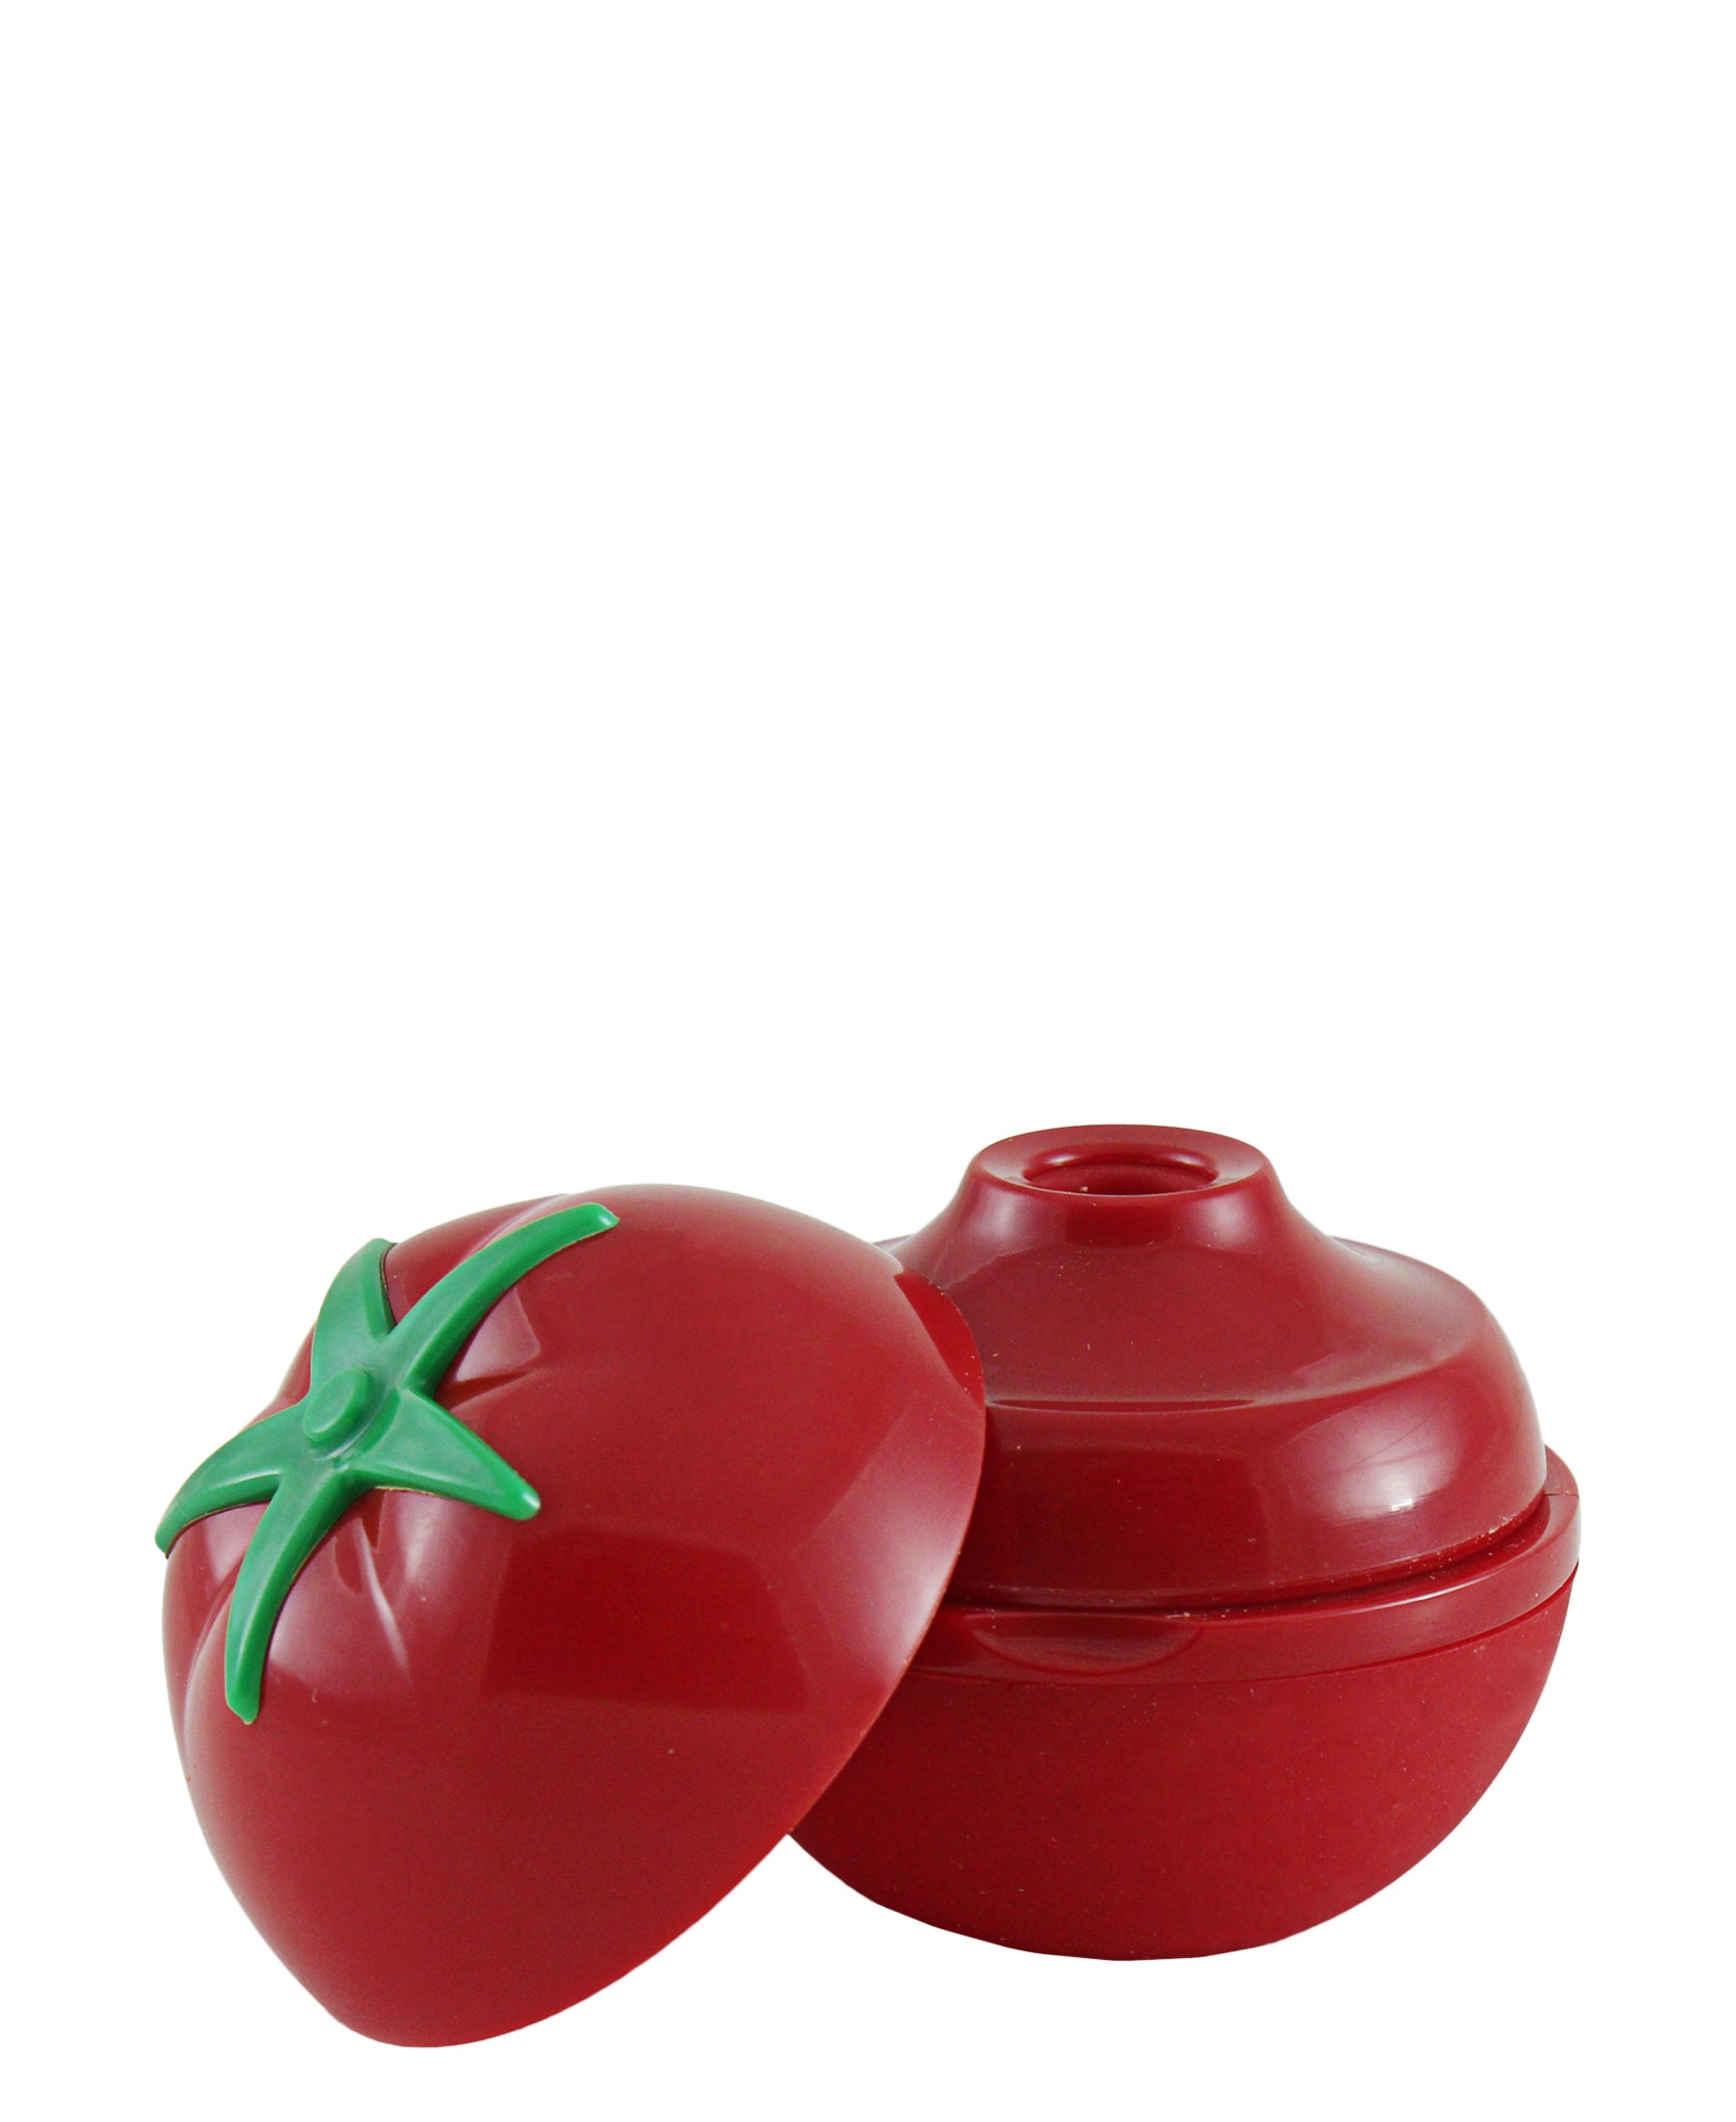 Joie Tomato Dressing Ball - Red